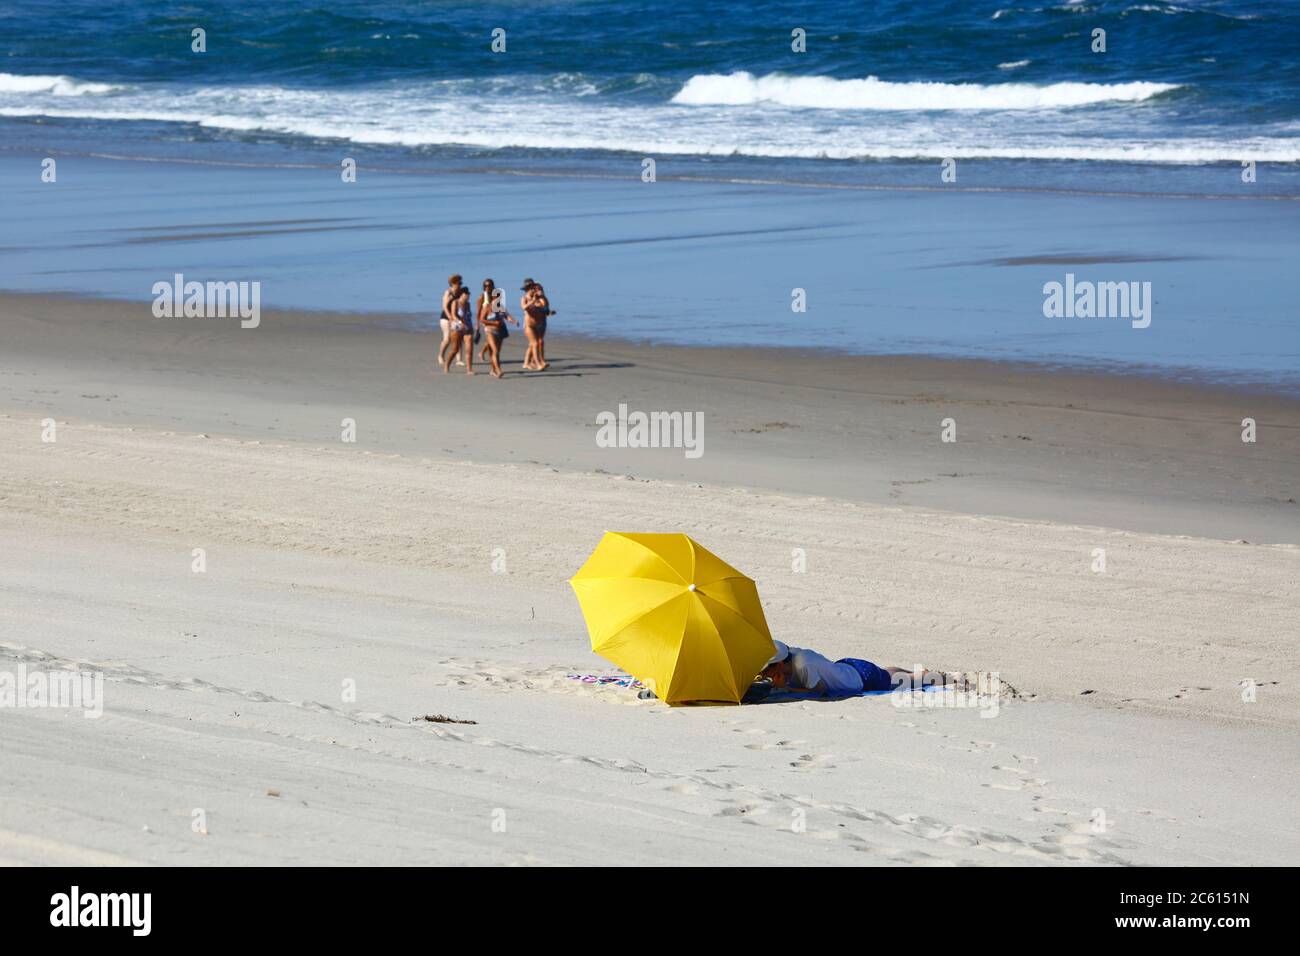 6th July 2020, Vila Praia de Ancora, northern Portugal: A few people enjoy a sunny day on a nearly empty beach in Vila Praia de Ancora. Vila Praia de Ancora is a popular beach resort and its beaches would normally be a lot busier at this time of year. Stock Photo